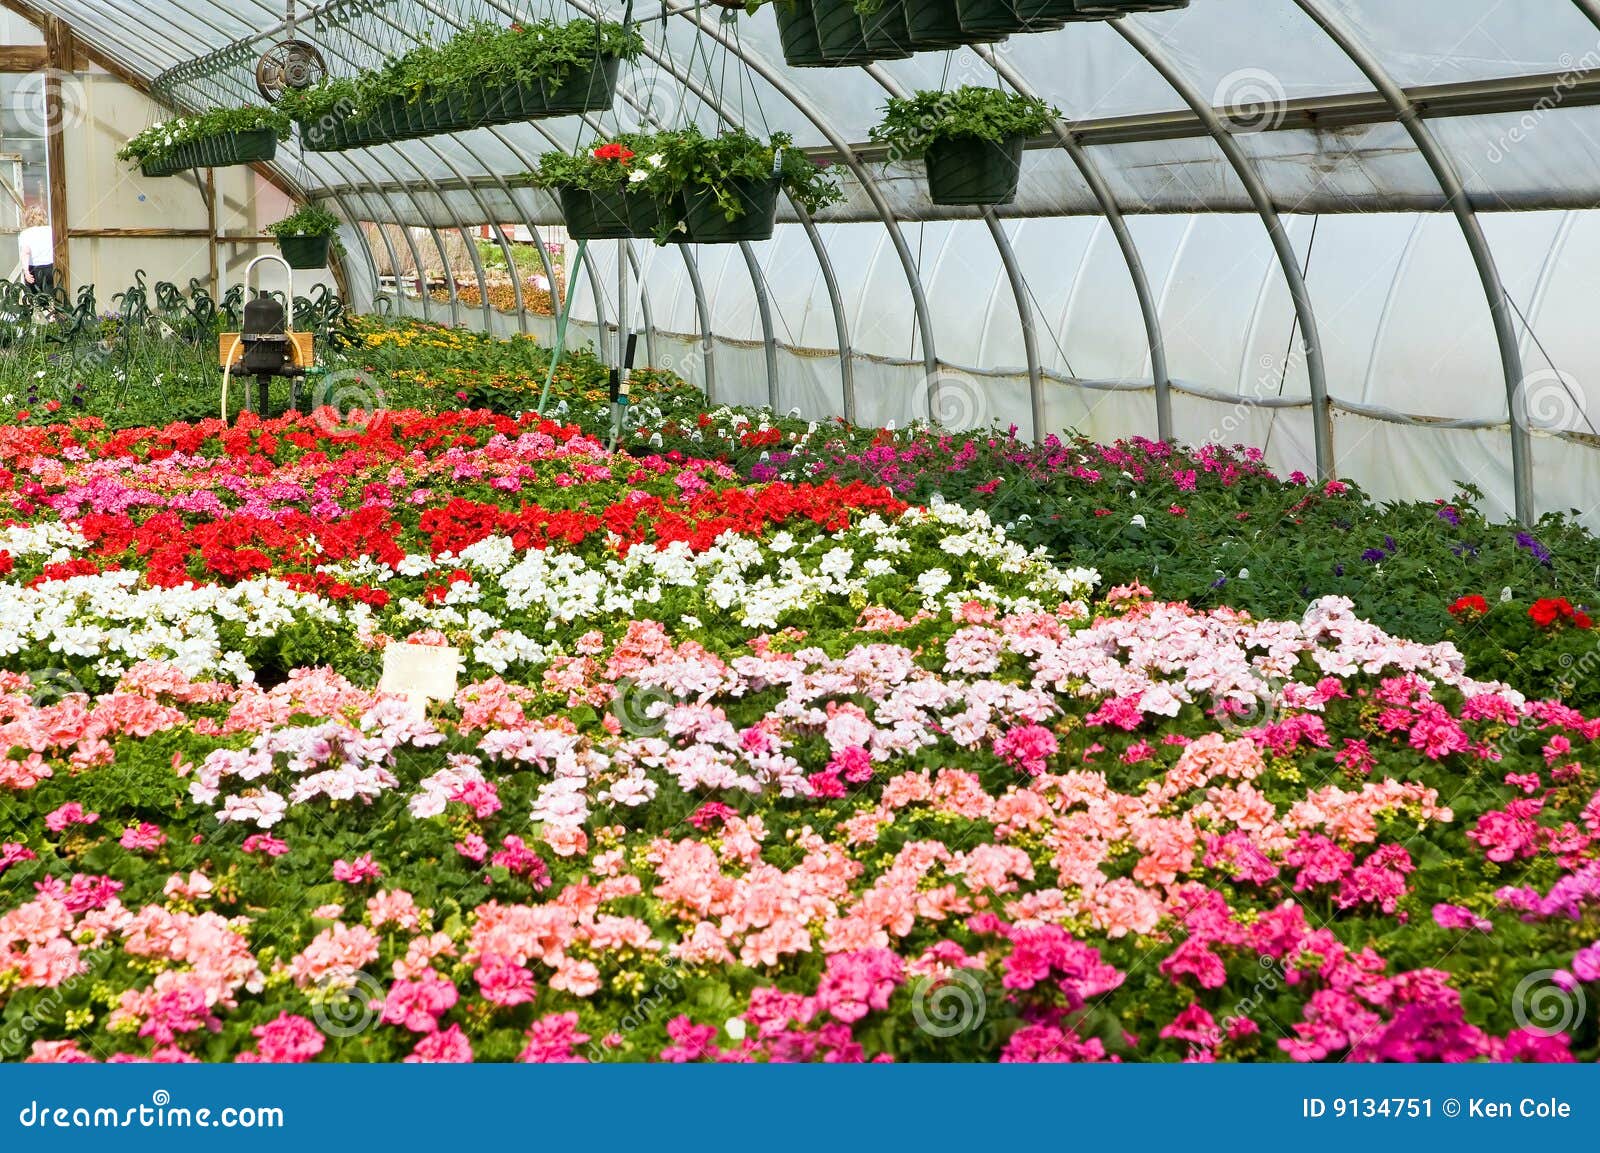 Spring Flowers In Greenhouse Stock Image - Image: 9134751